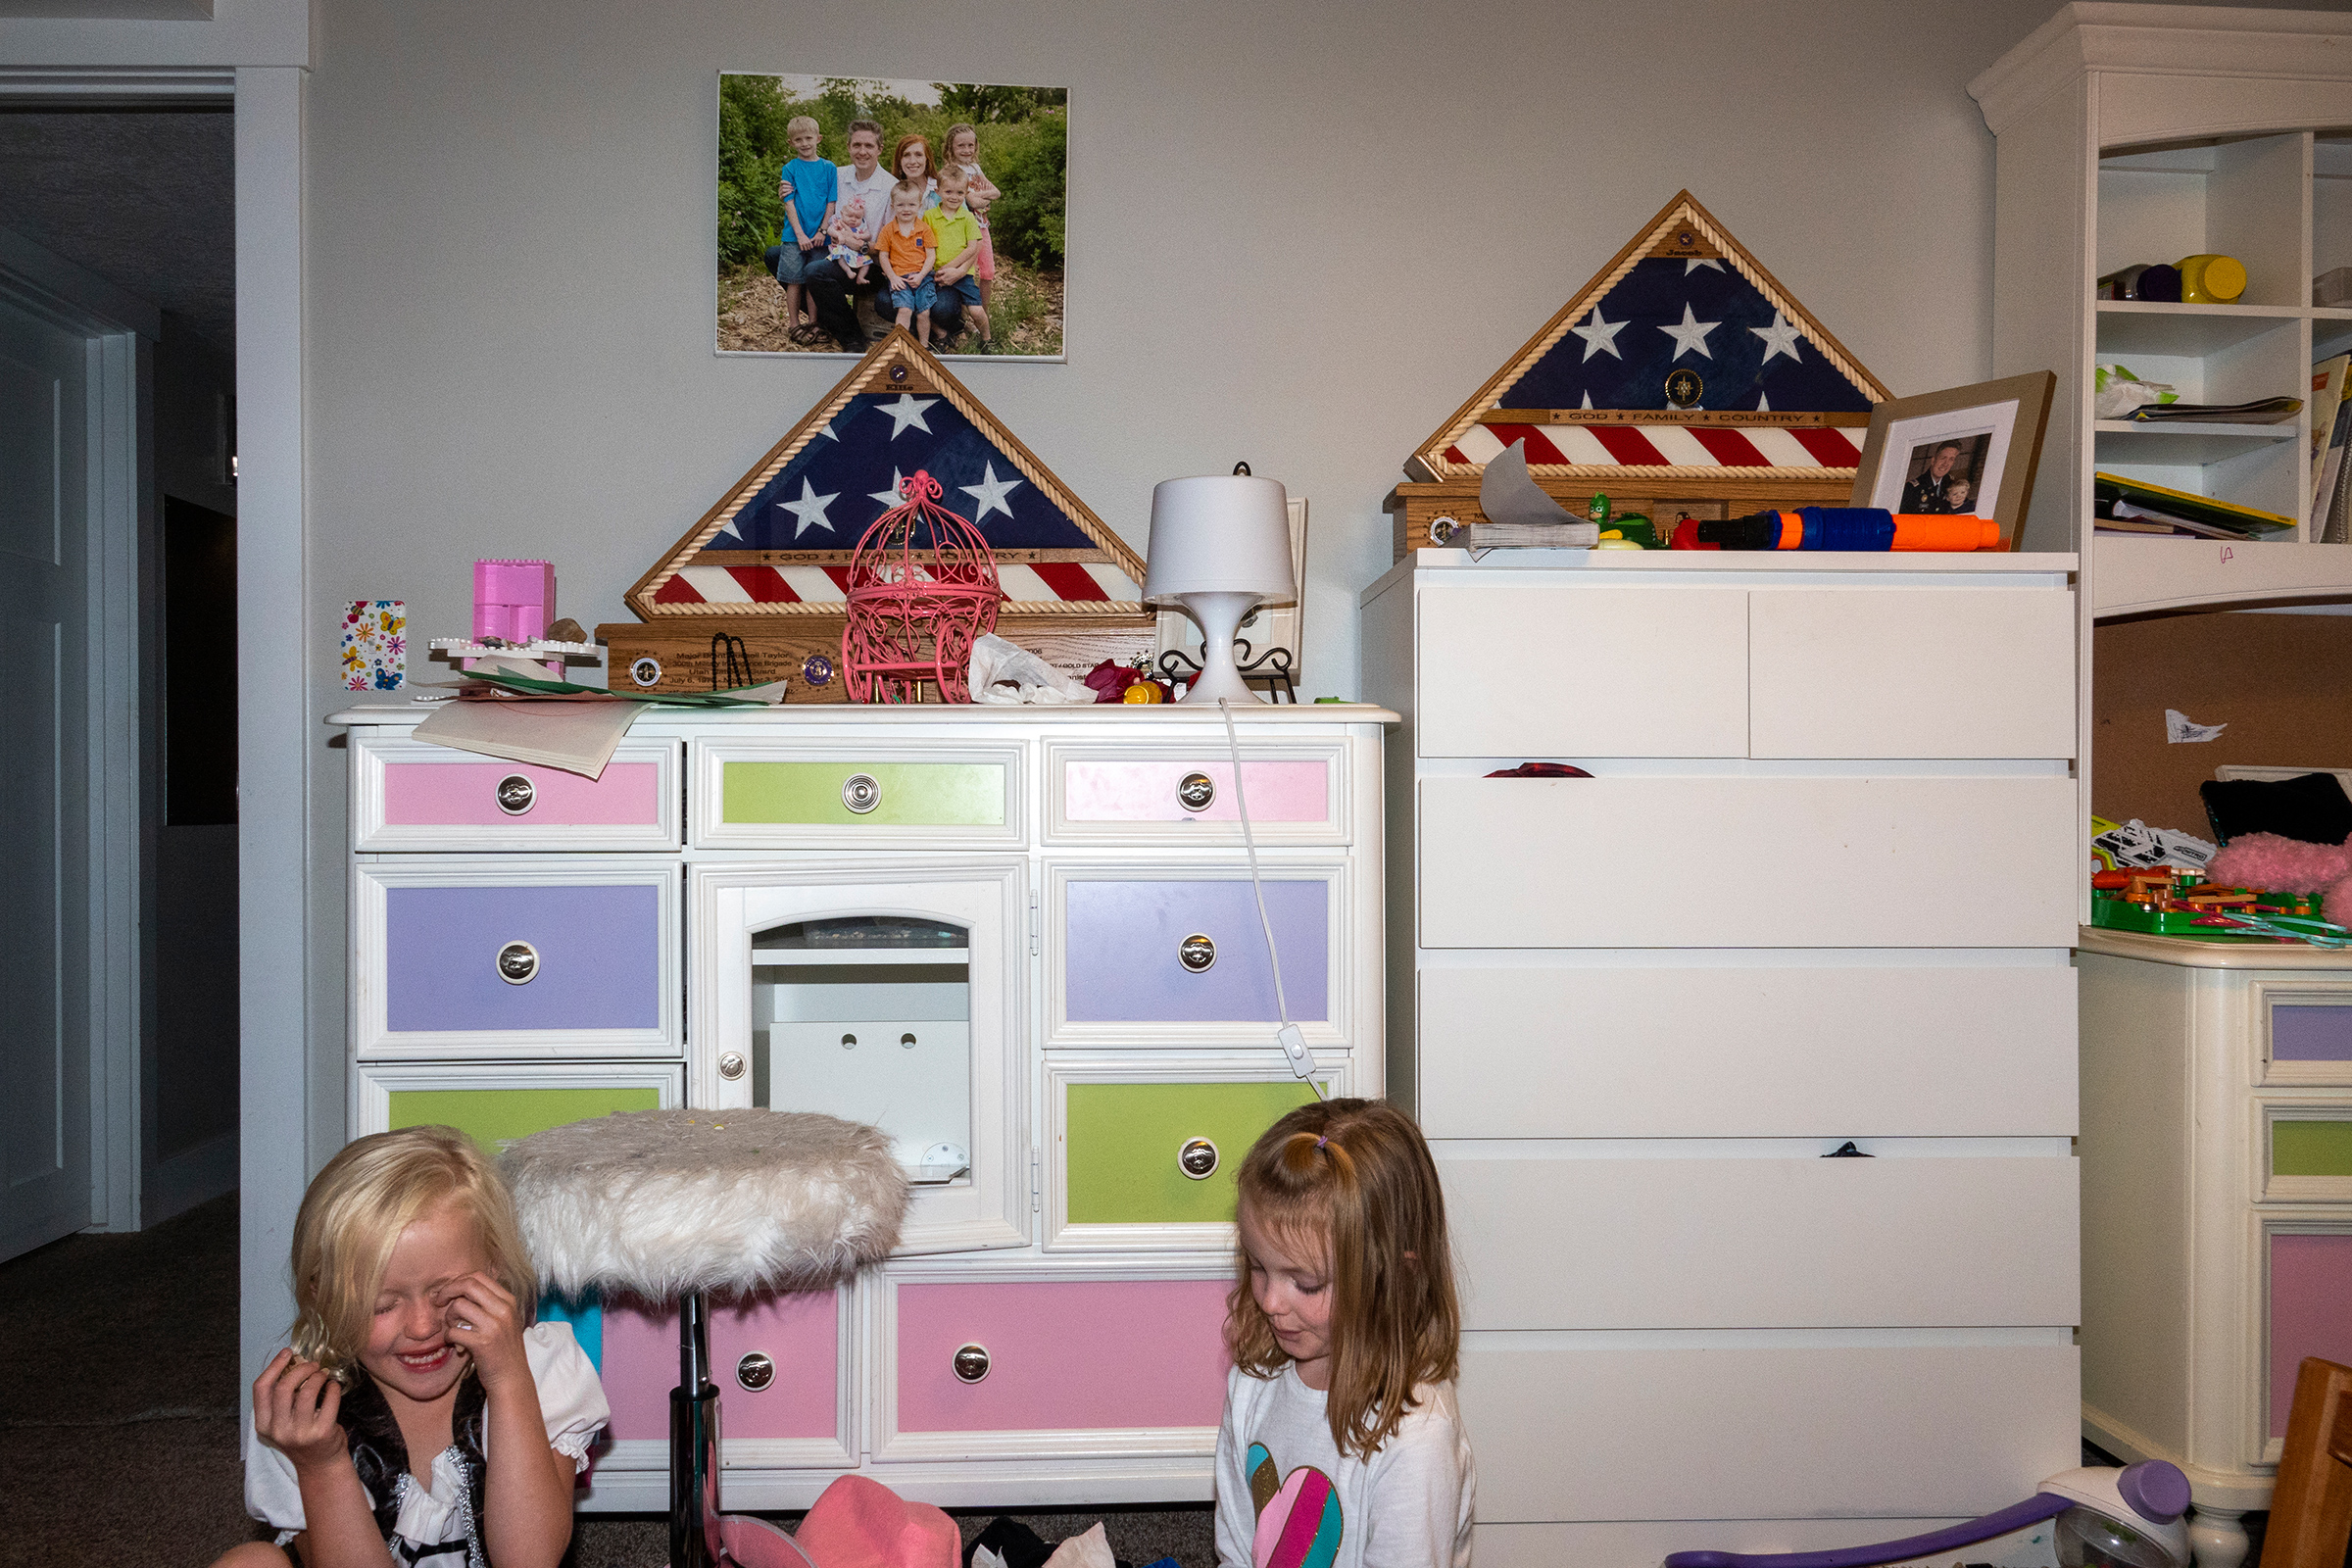 Ellie plays with cousin Vivian Pack in her bedroom. Resting on the dressers are two framed flags presented to each member of the family by the U.S. military. (Peter van Agtmael—Magnum Photos for TIME)